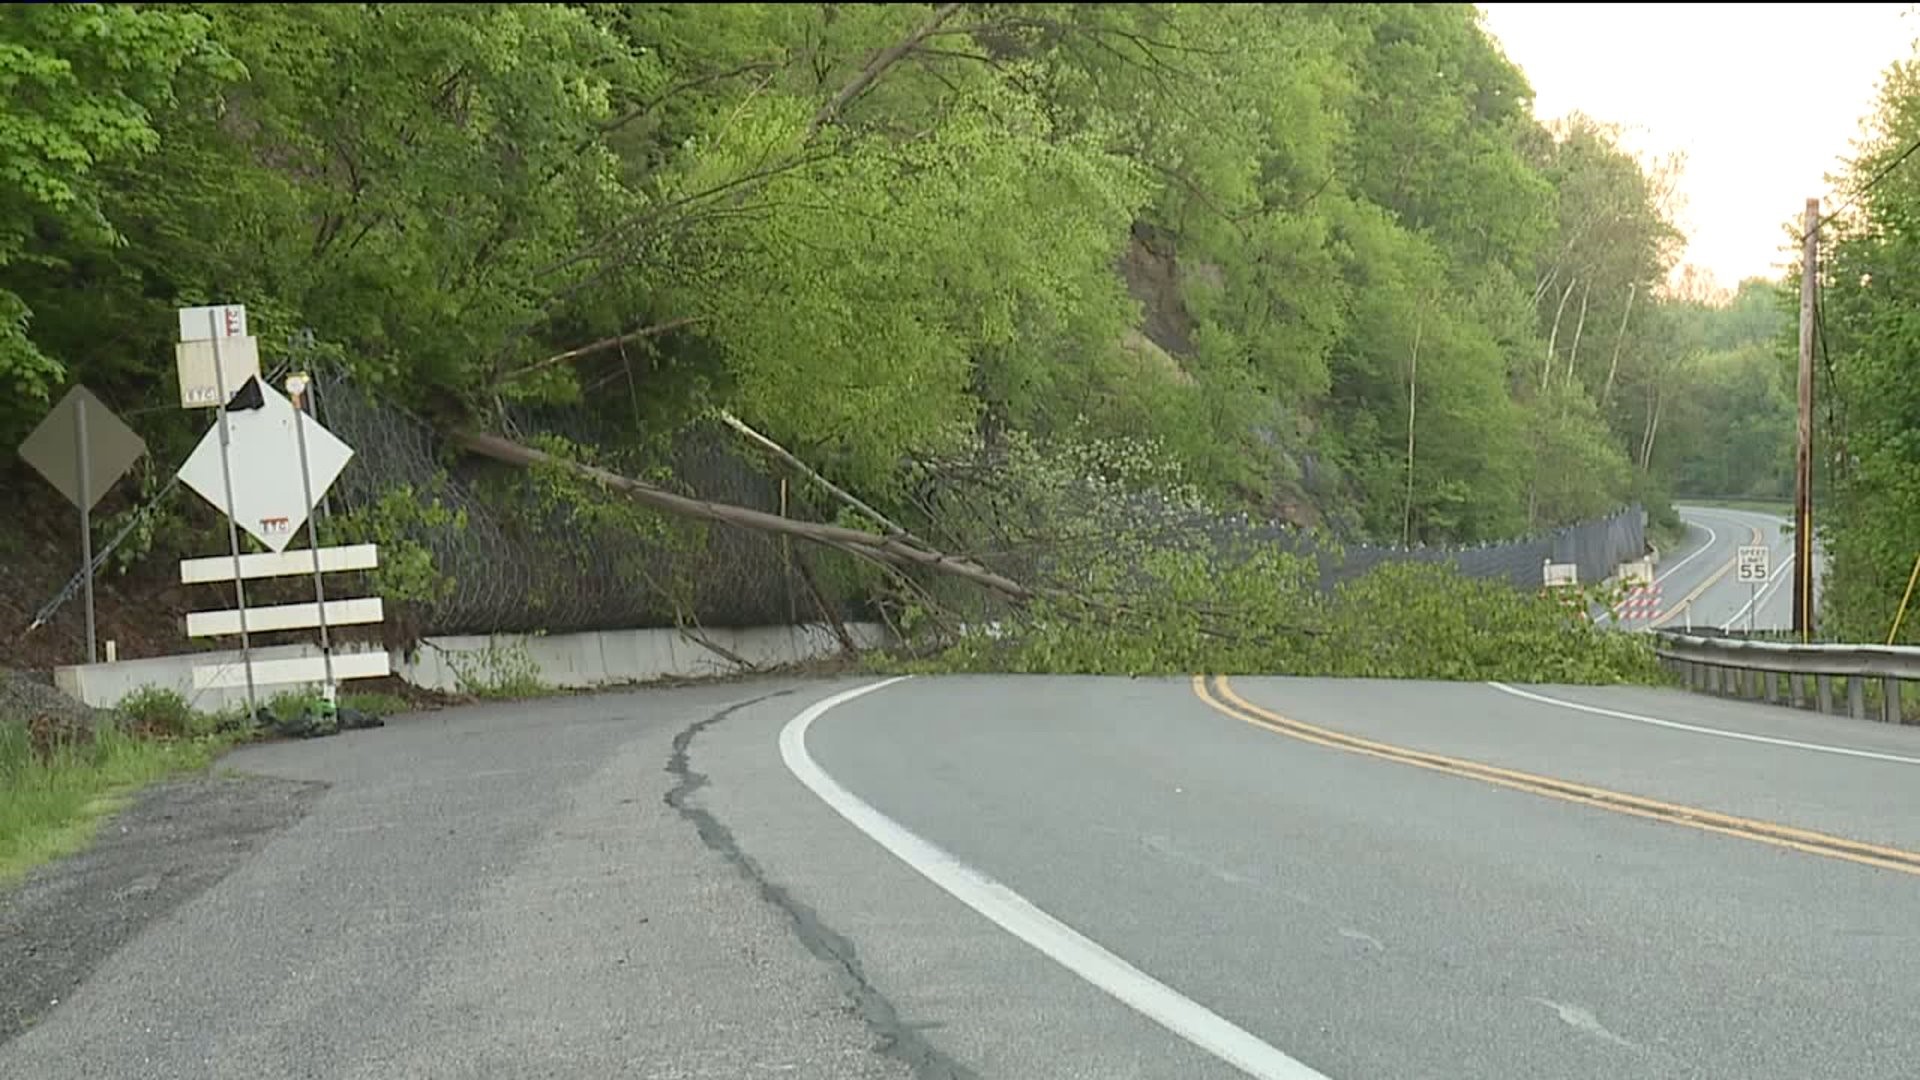 Rock Slide Closes Part of Route 147 in Northumberland County